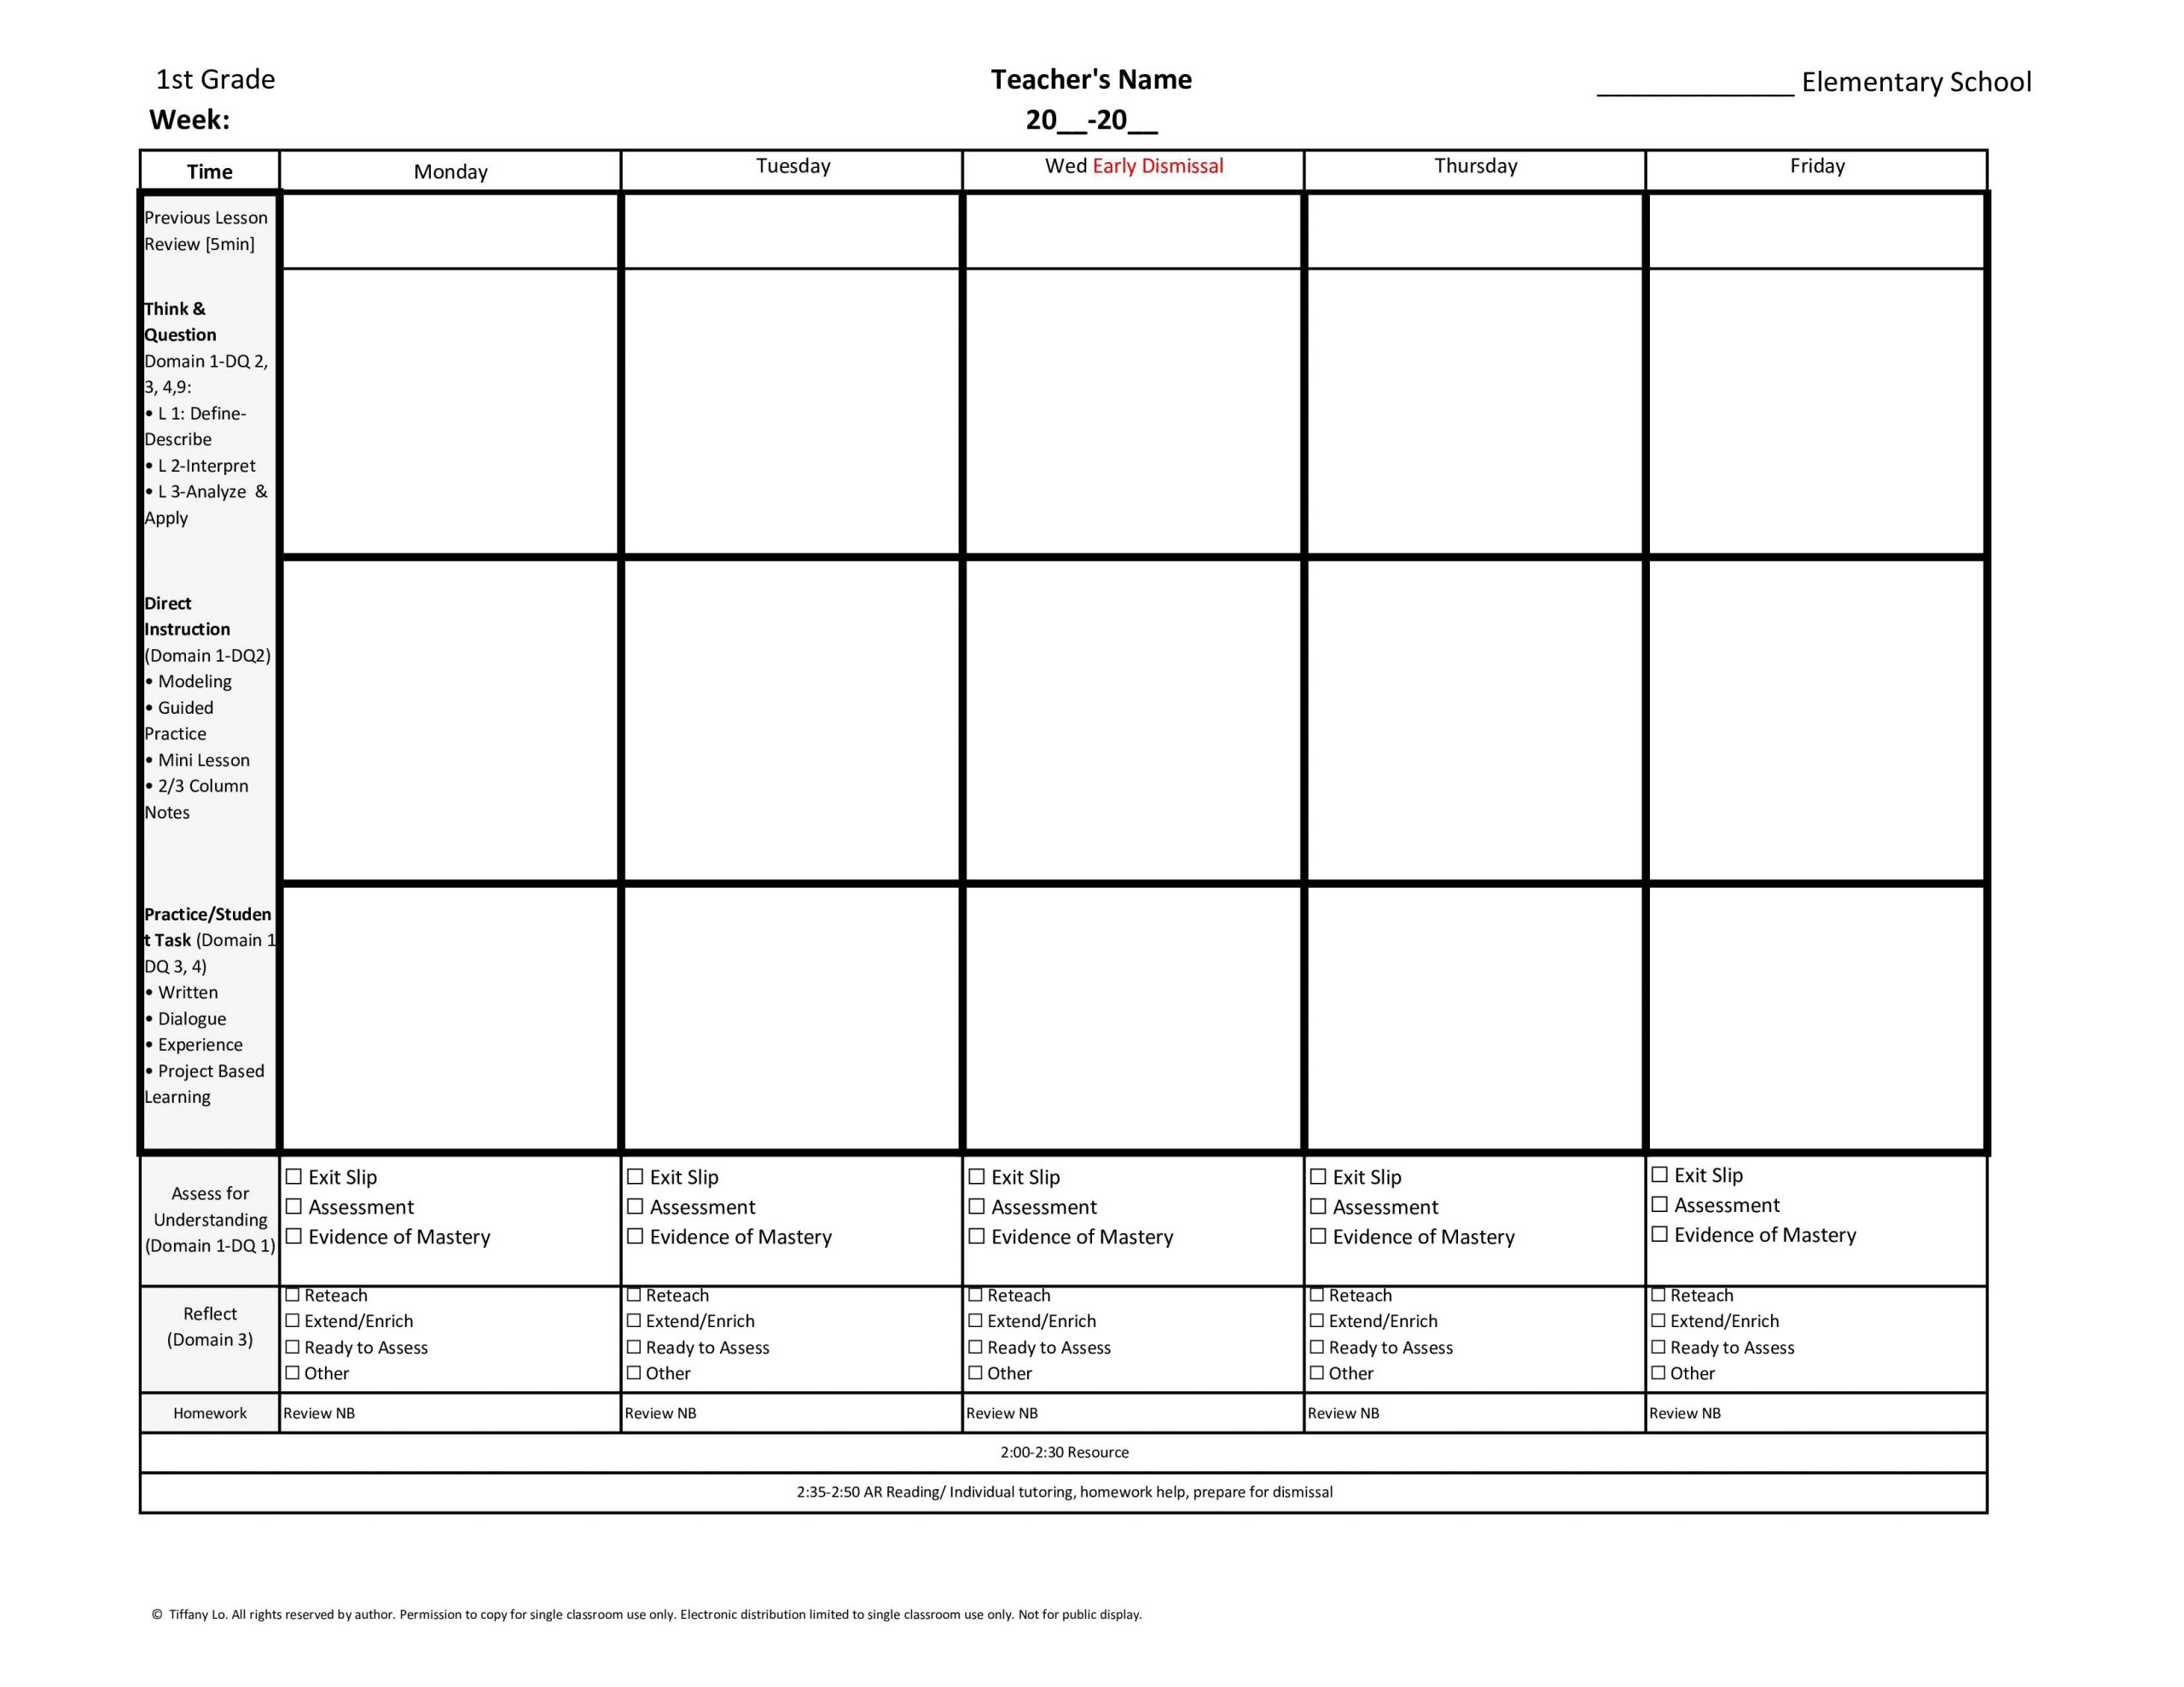 1St First Grade Common Core Weekly Lesson Plan Template W/ Drop Down Lists